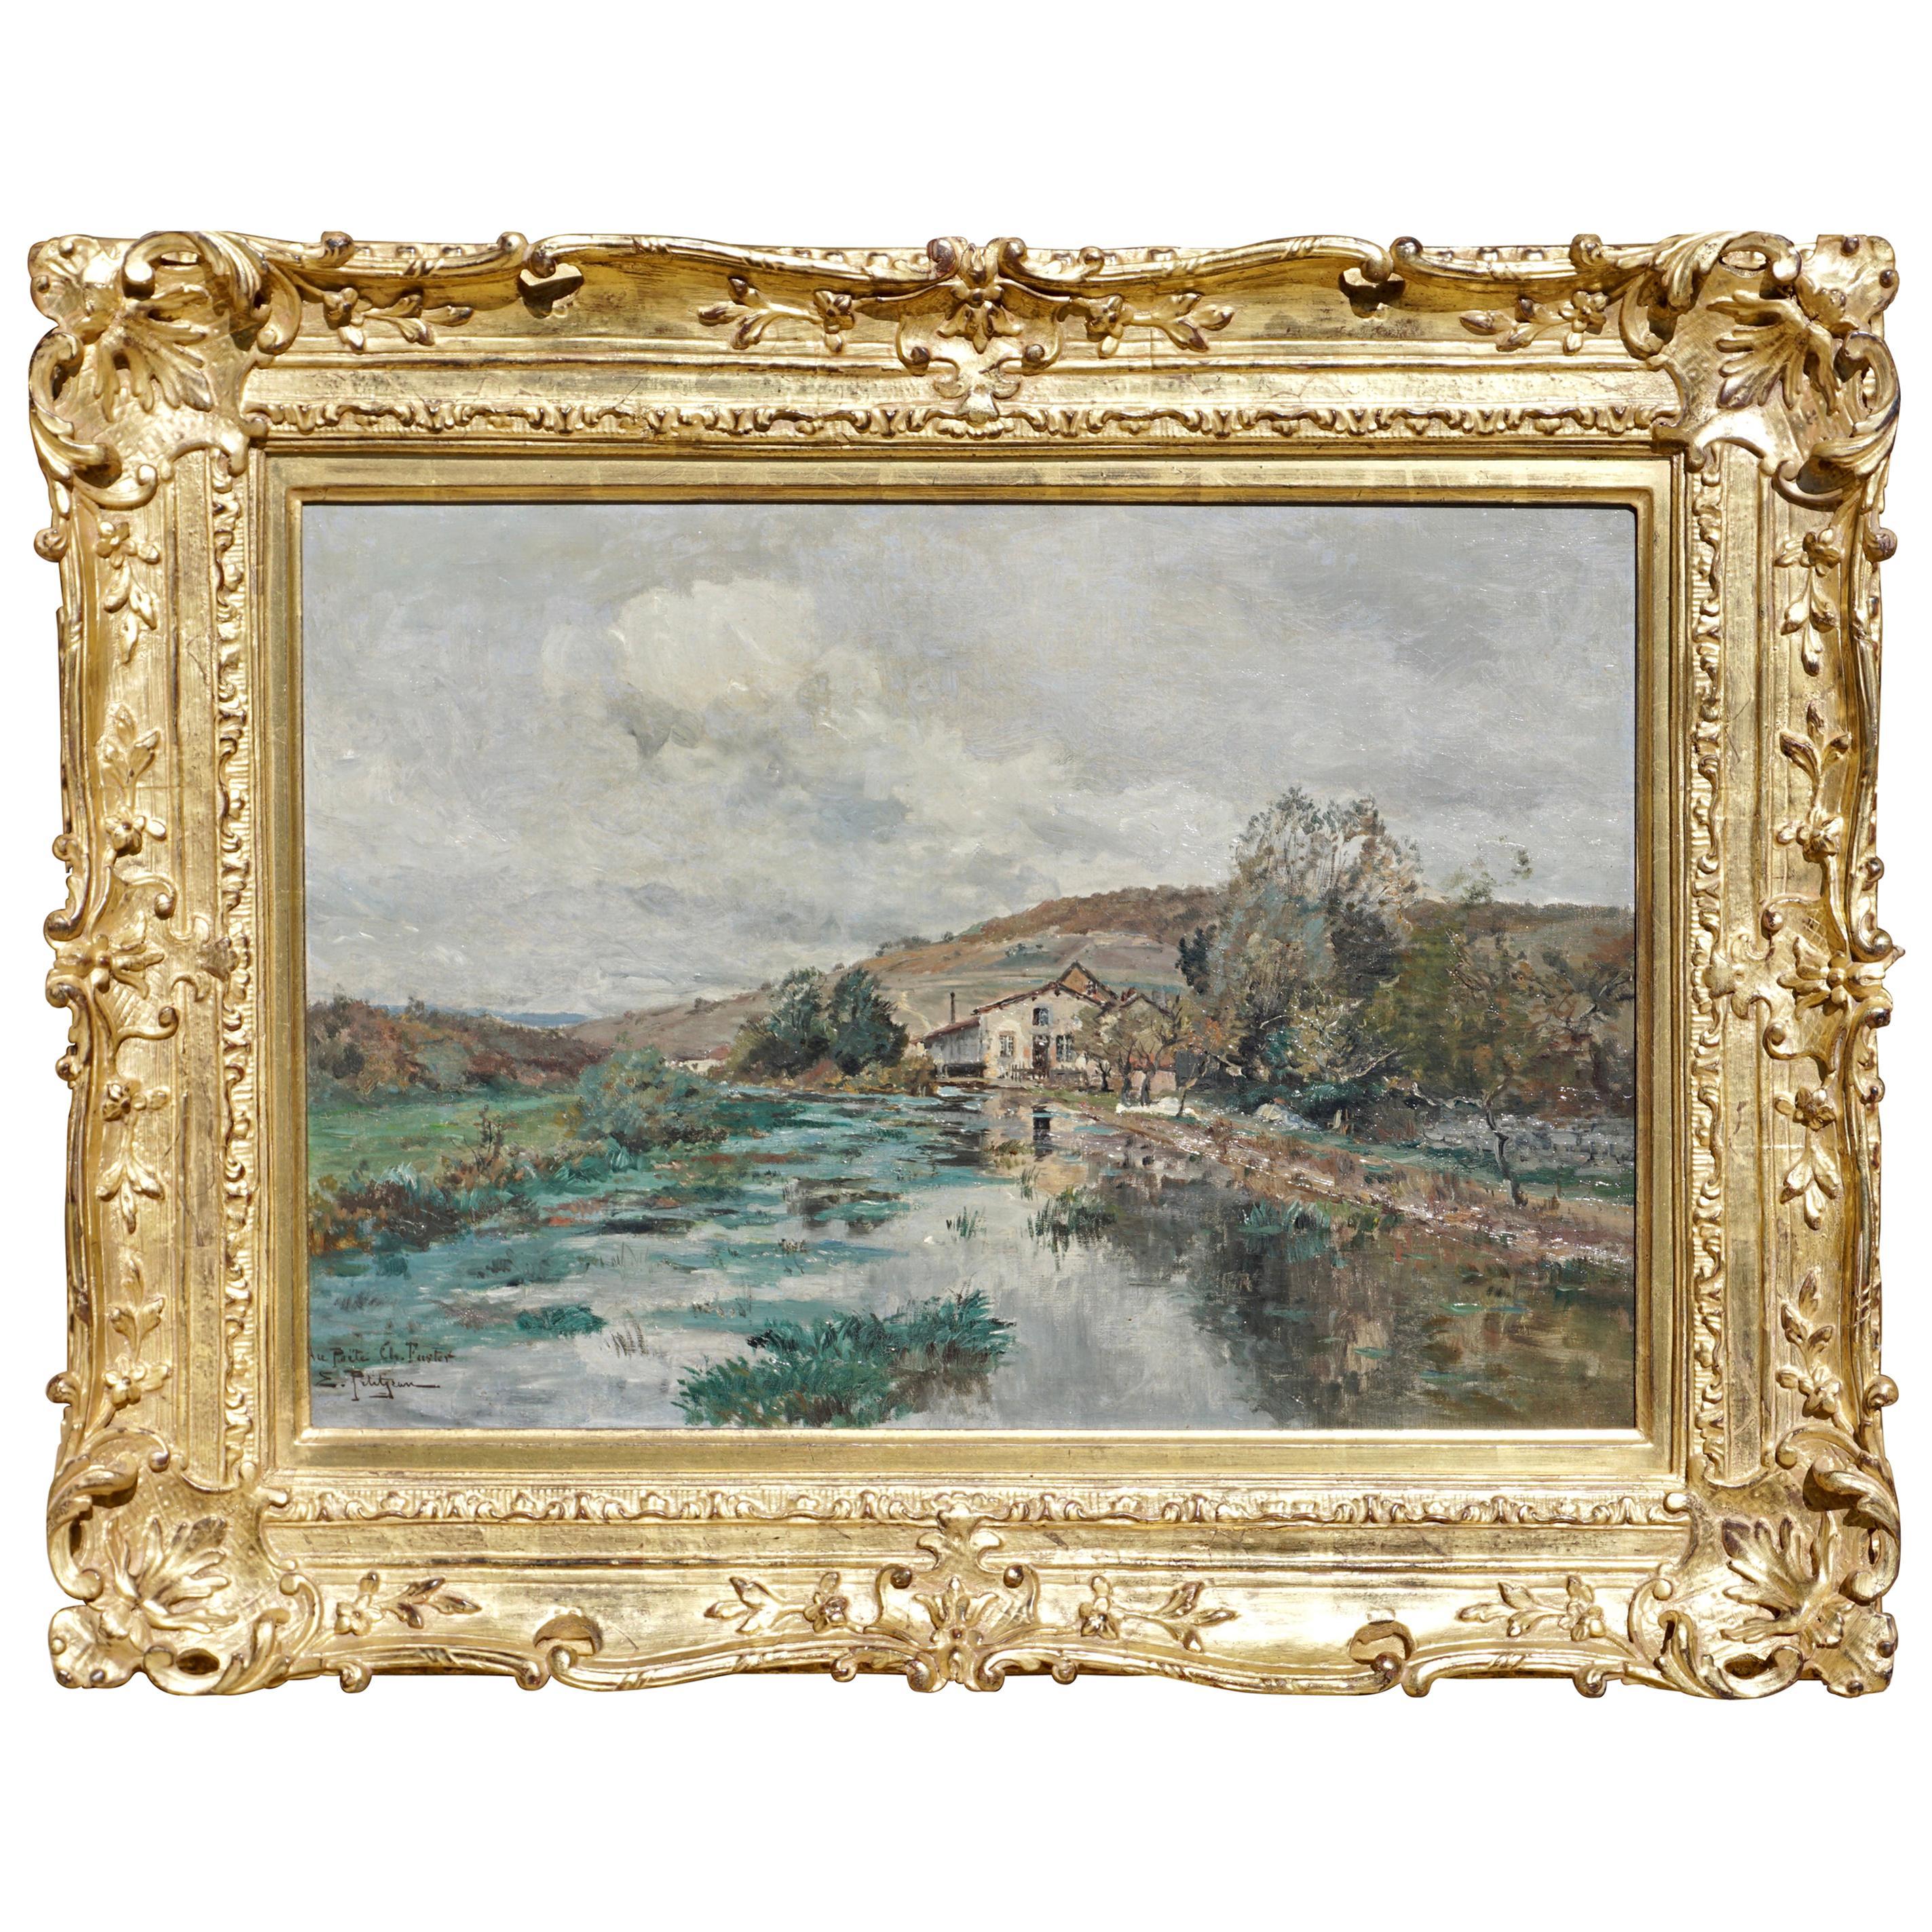 A wonderful and detailed landscape painting signed and inscribed oil on canvas painting by Edmond Petitjean, (French 1844-1925).

Condition: Excellent. Looks like it was recently cleaned and revarnished.

Measures: Canvas 23.75 x 17 inches
Framed 32